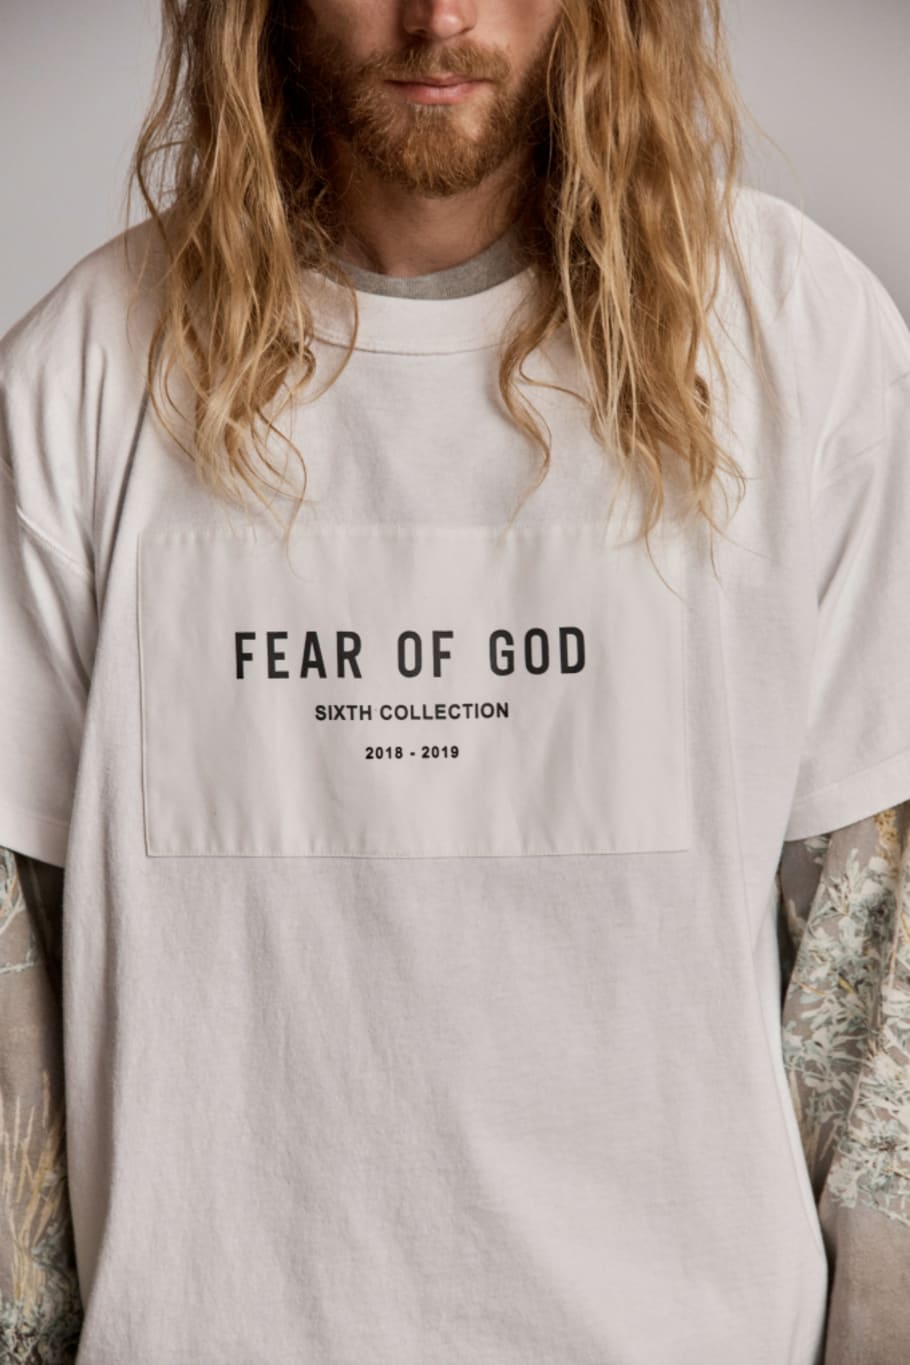 FEAR OF GOD SIXTH COLLECTION